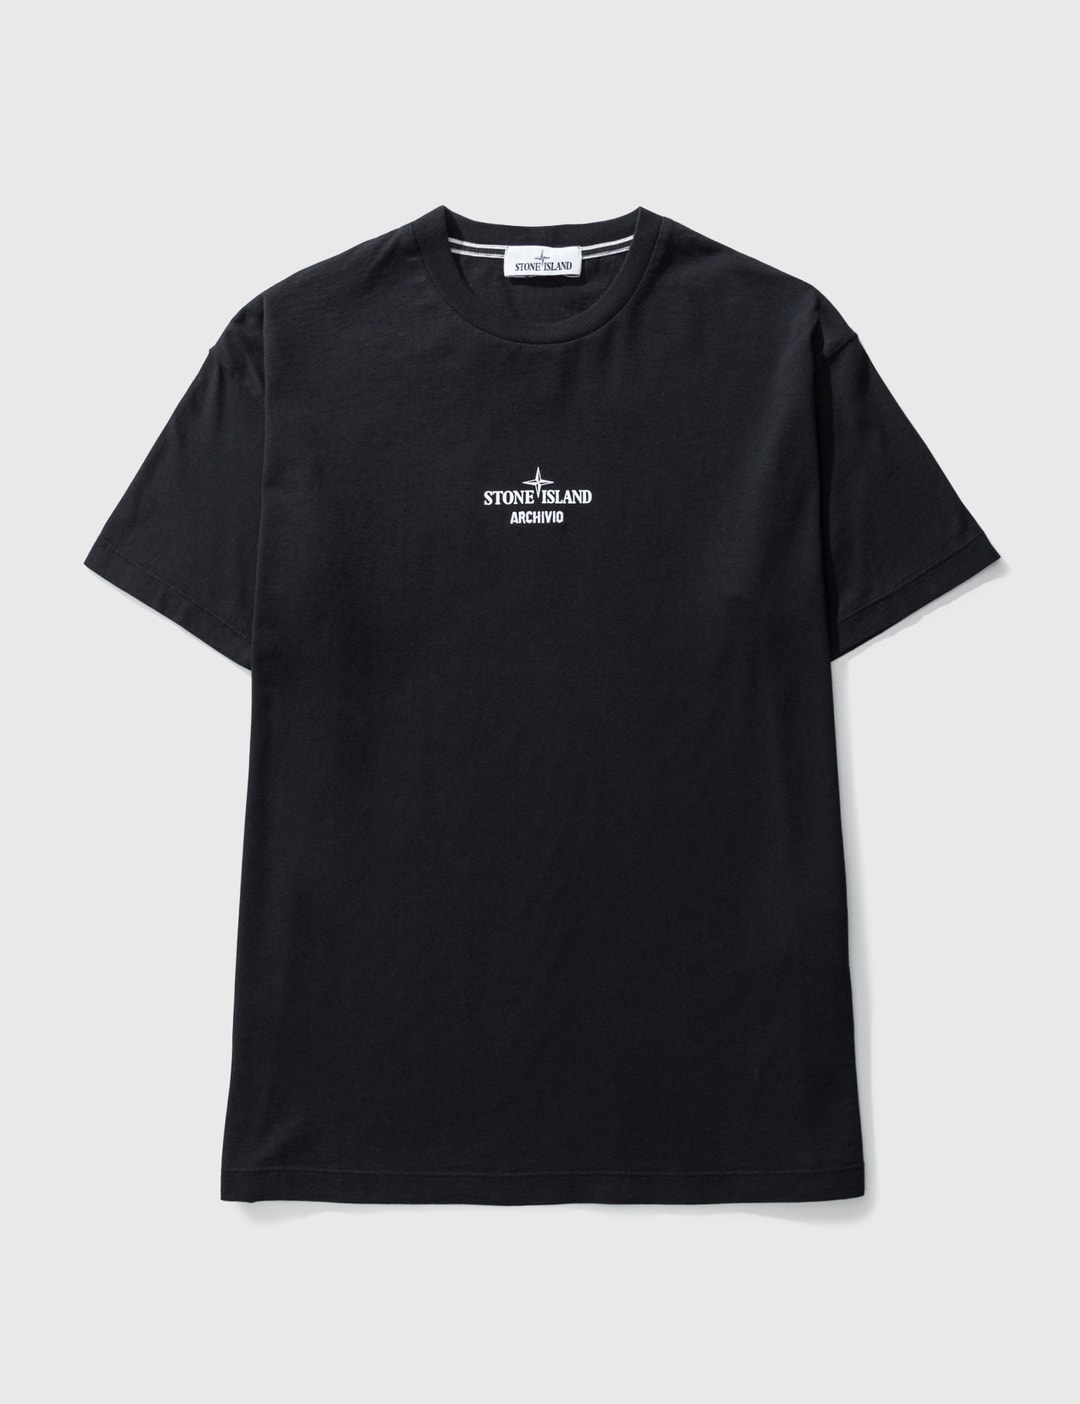 Stone Island - Archive Print T-shirt | HBX - Globally Curated Fashion ...